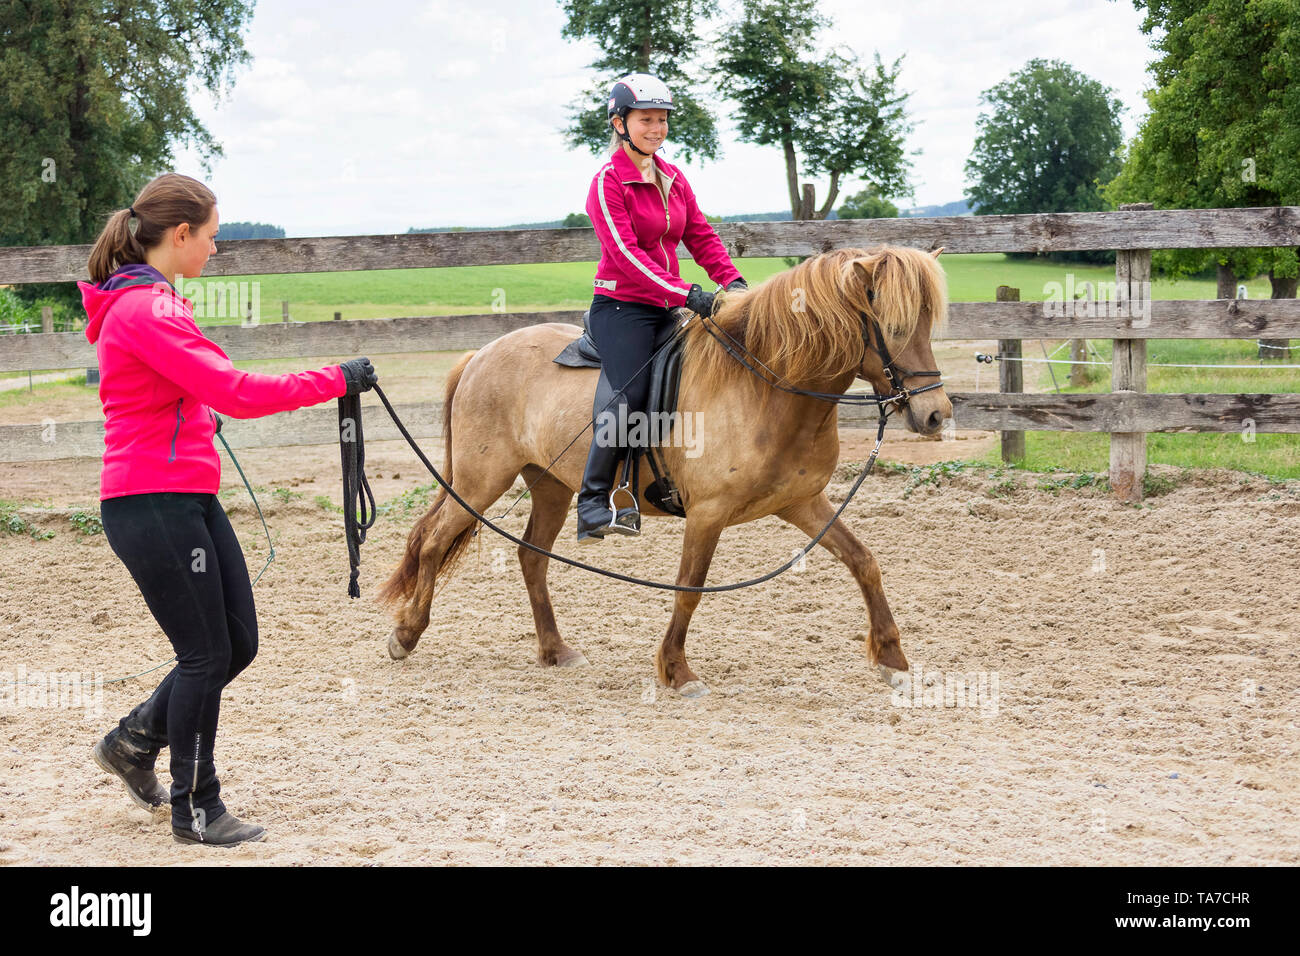 Icelandic Horse. Training of a young mare, bein longed. It learns to accept bridle, saddle and rider. Austria Stock Photo